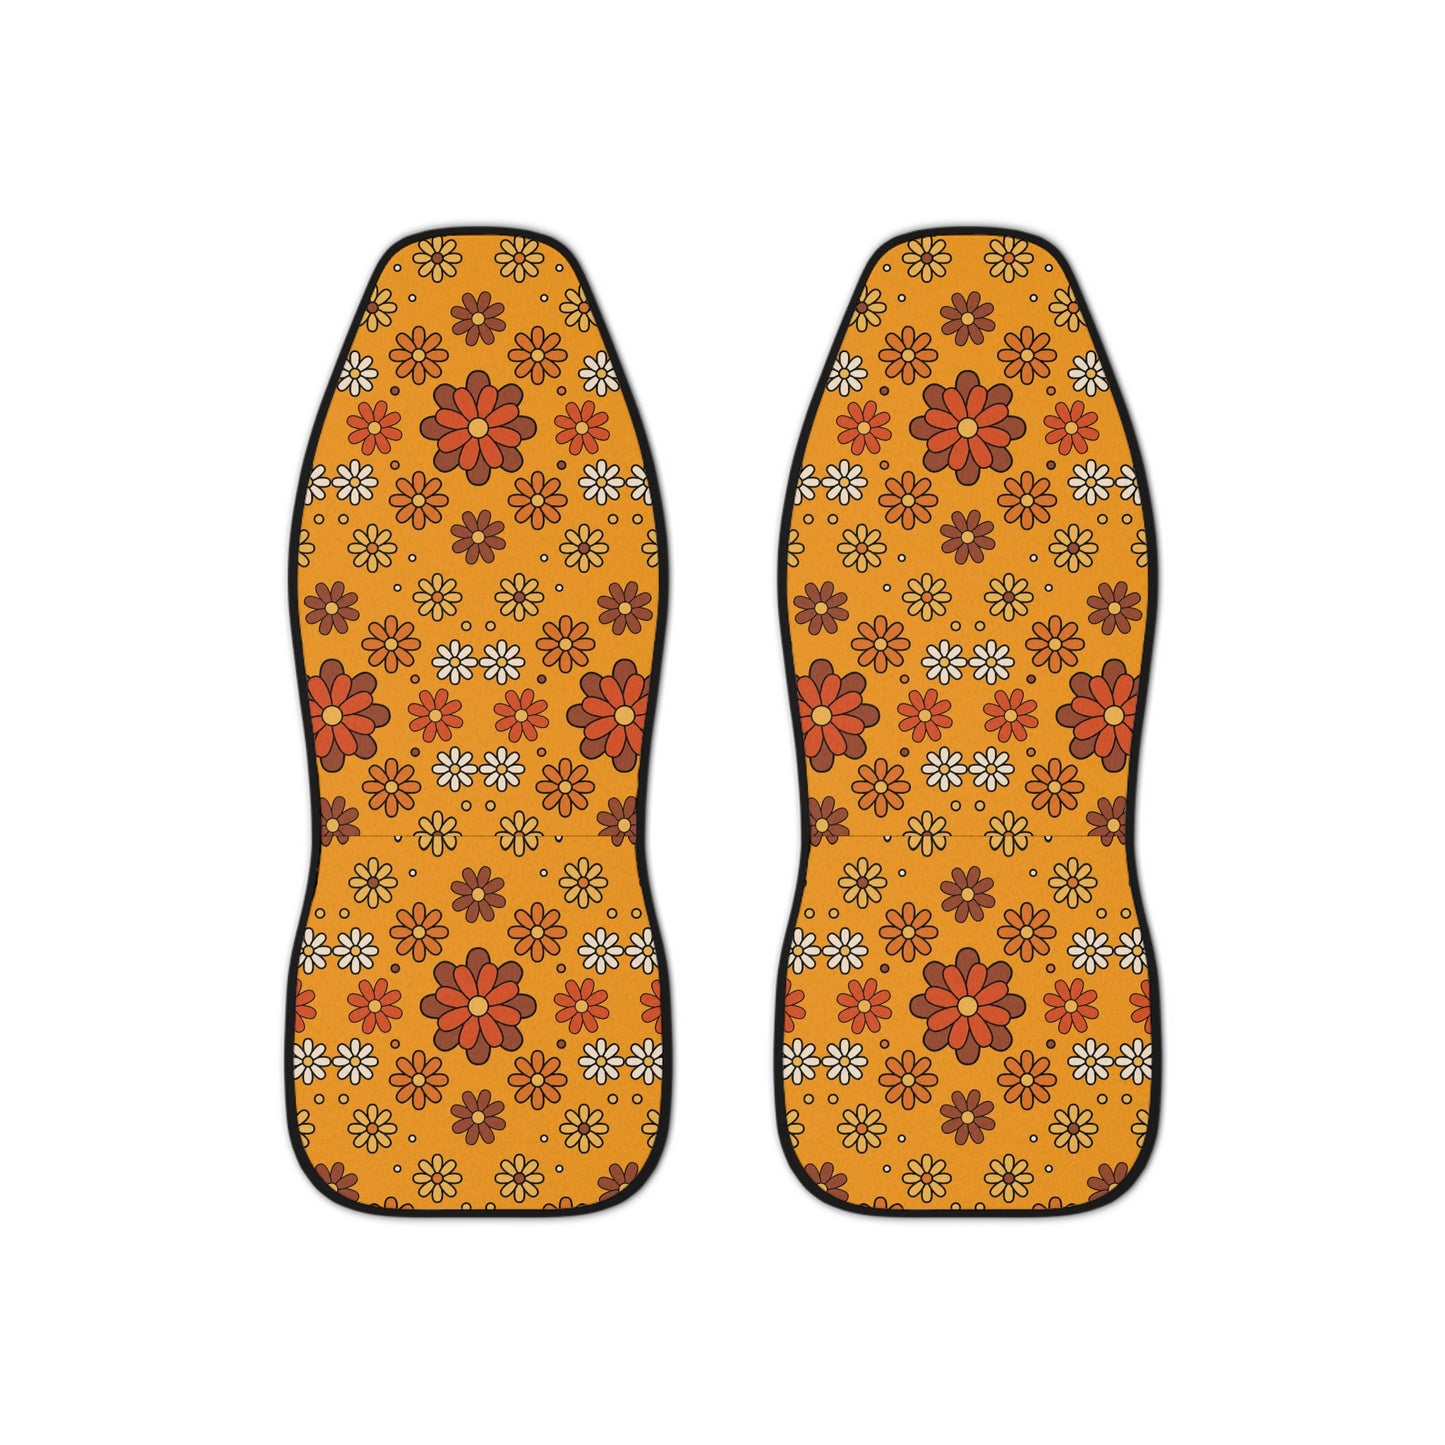 Retro 60s 70s Groovy Mod Daisy Floral Mid Century Orange & Brown Car Seat Covers